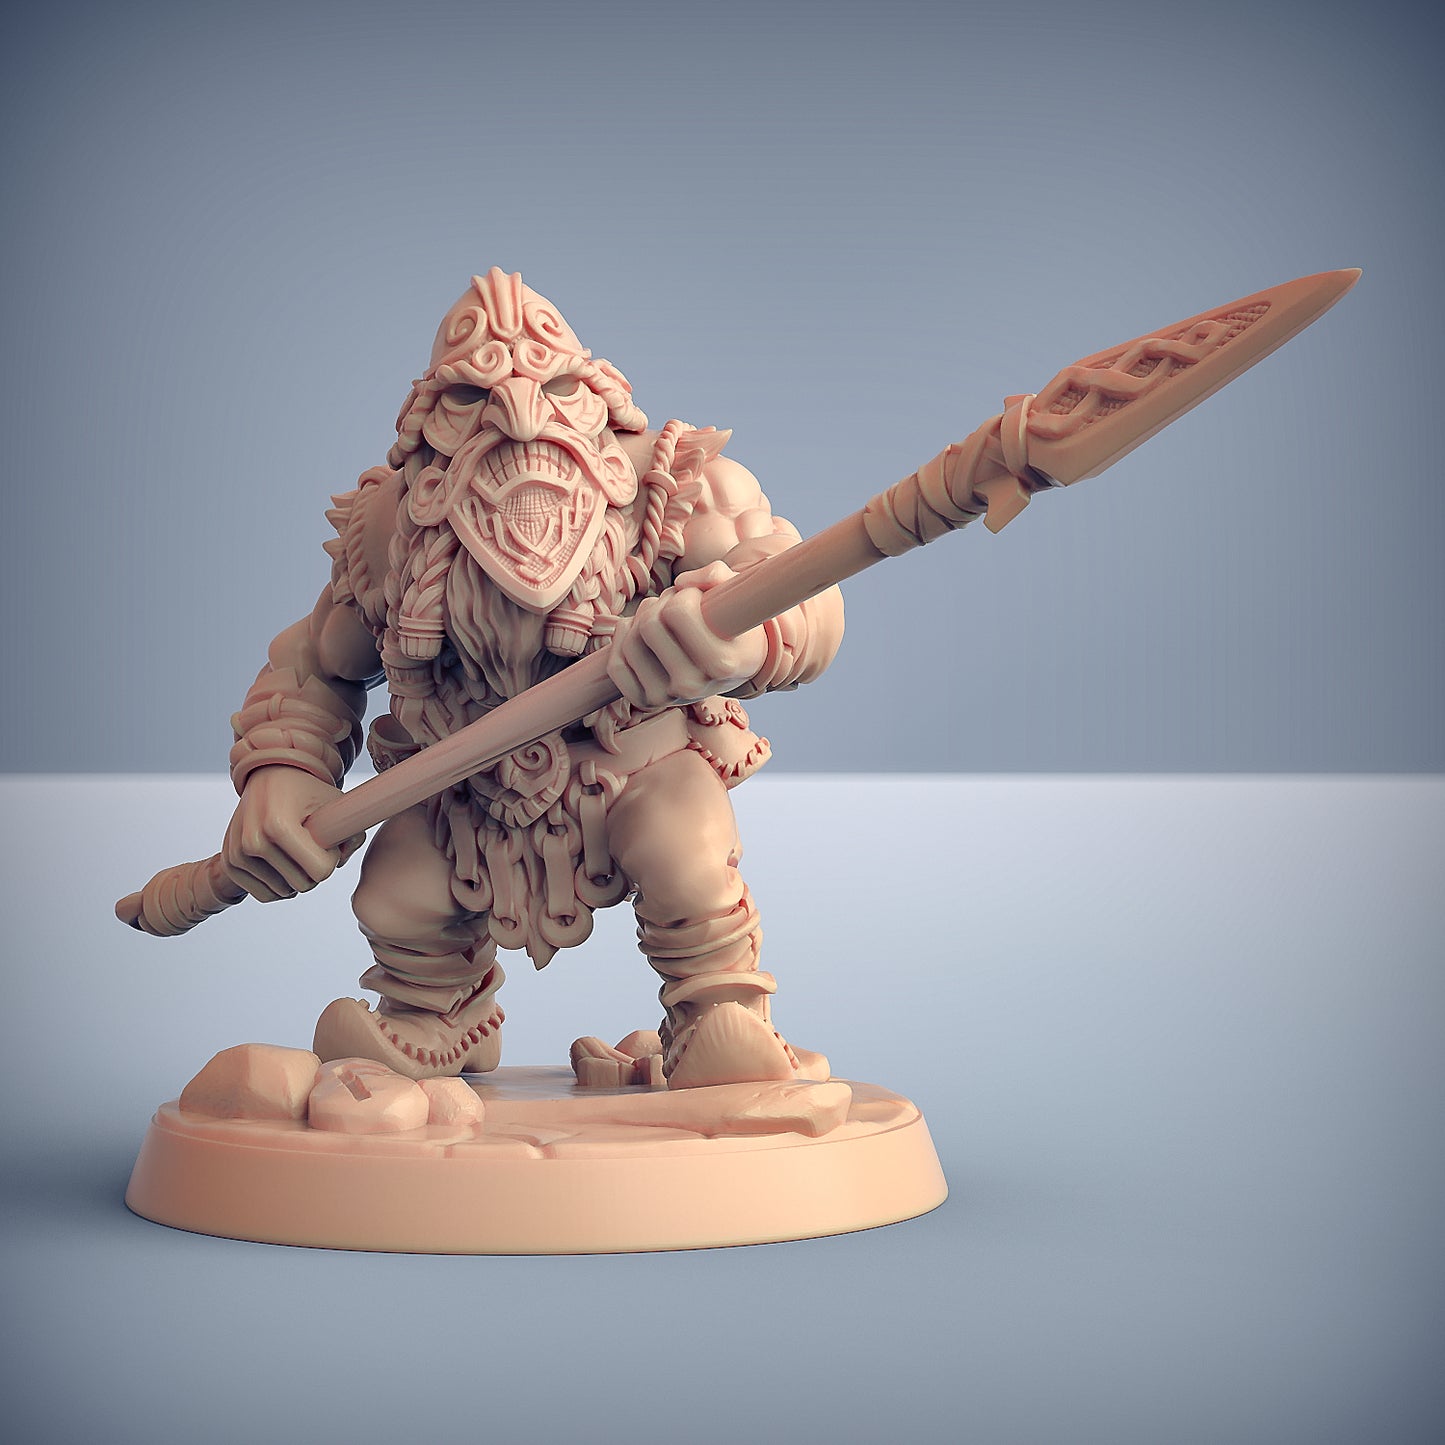 Dwarven Mountaineers from Artisan Guild